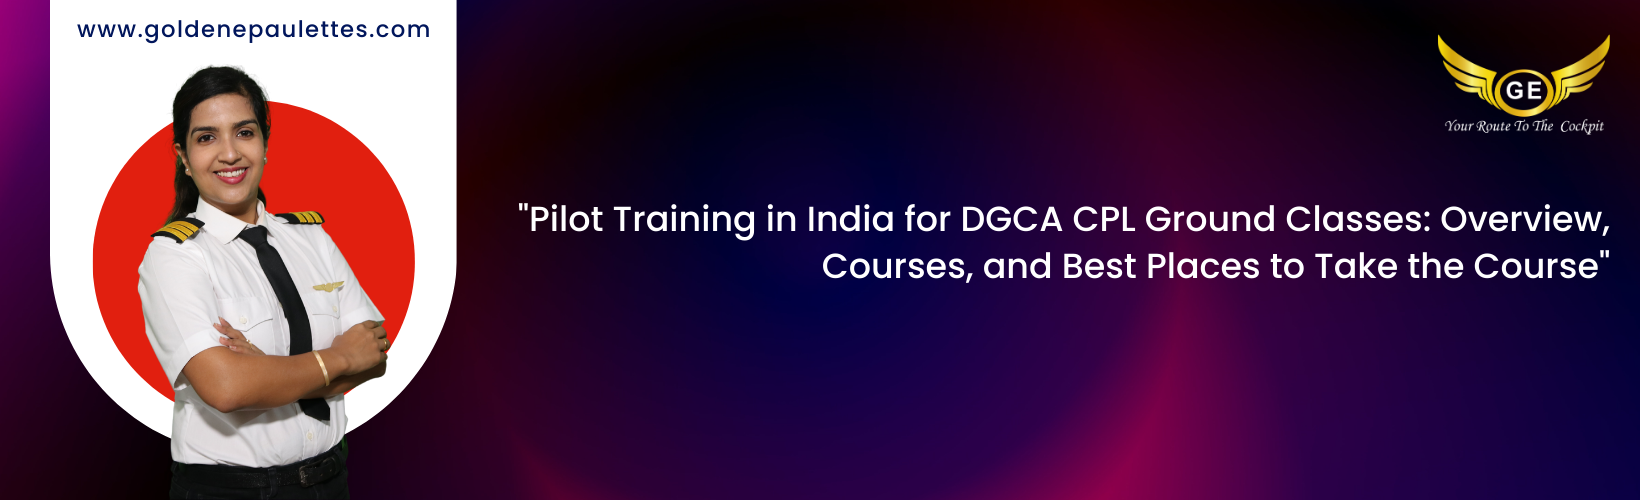 Test Series in India for the DGCA CPL Ground Classes